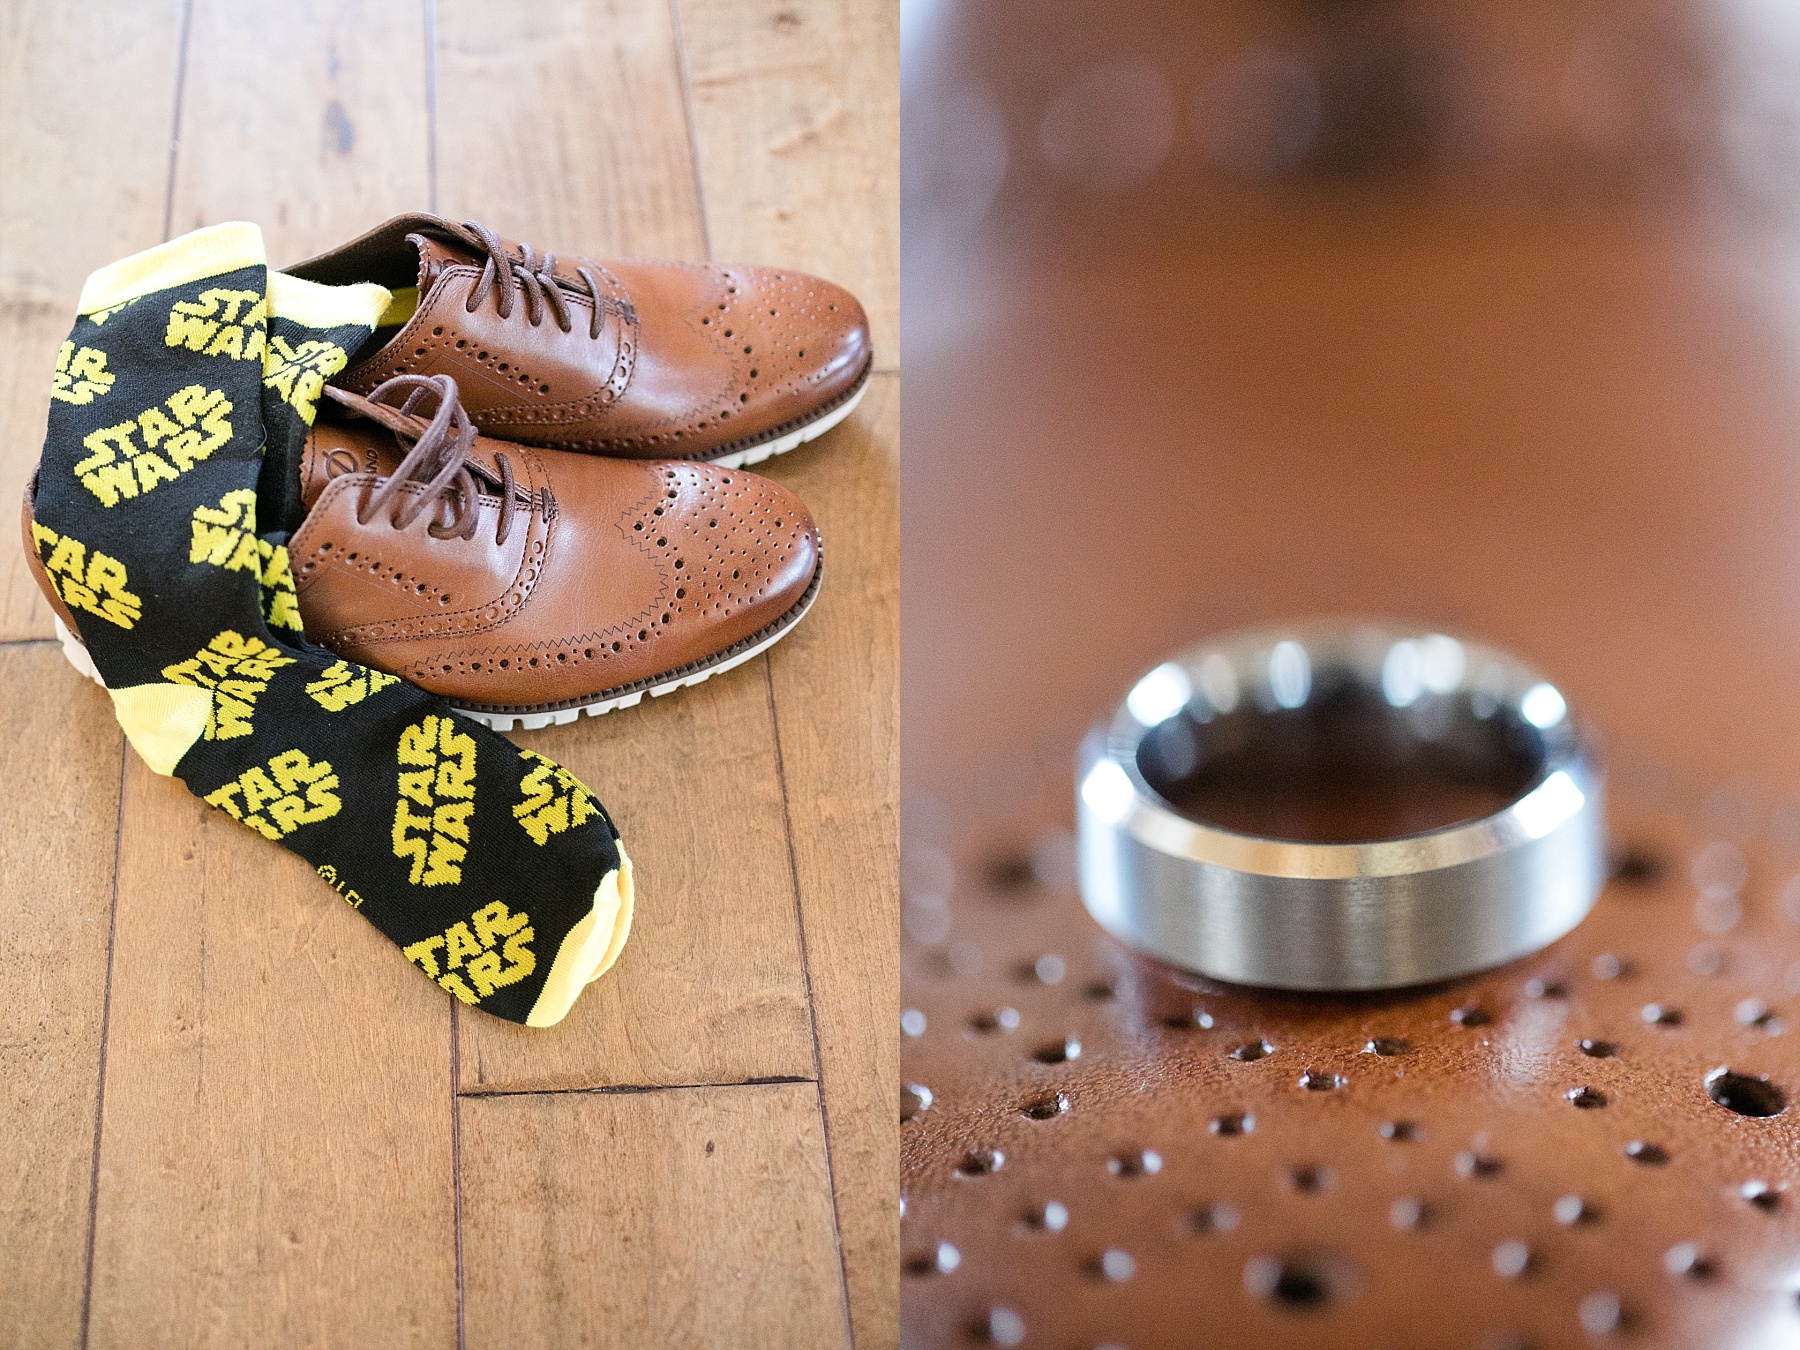 Star Wars socks the groom wore and his wedding band